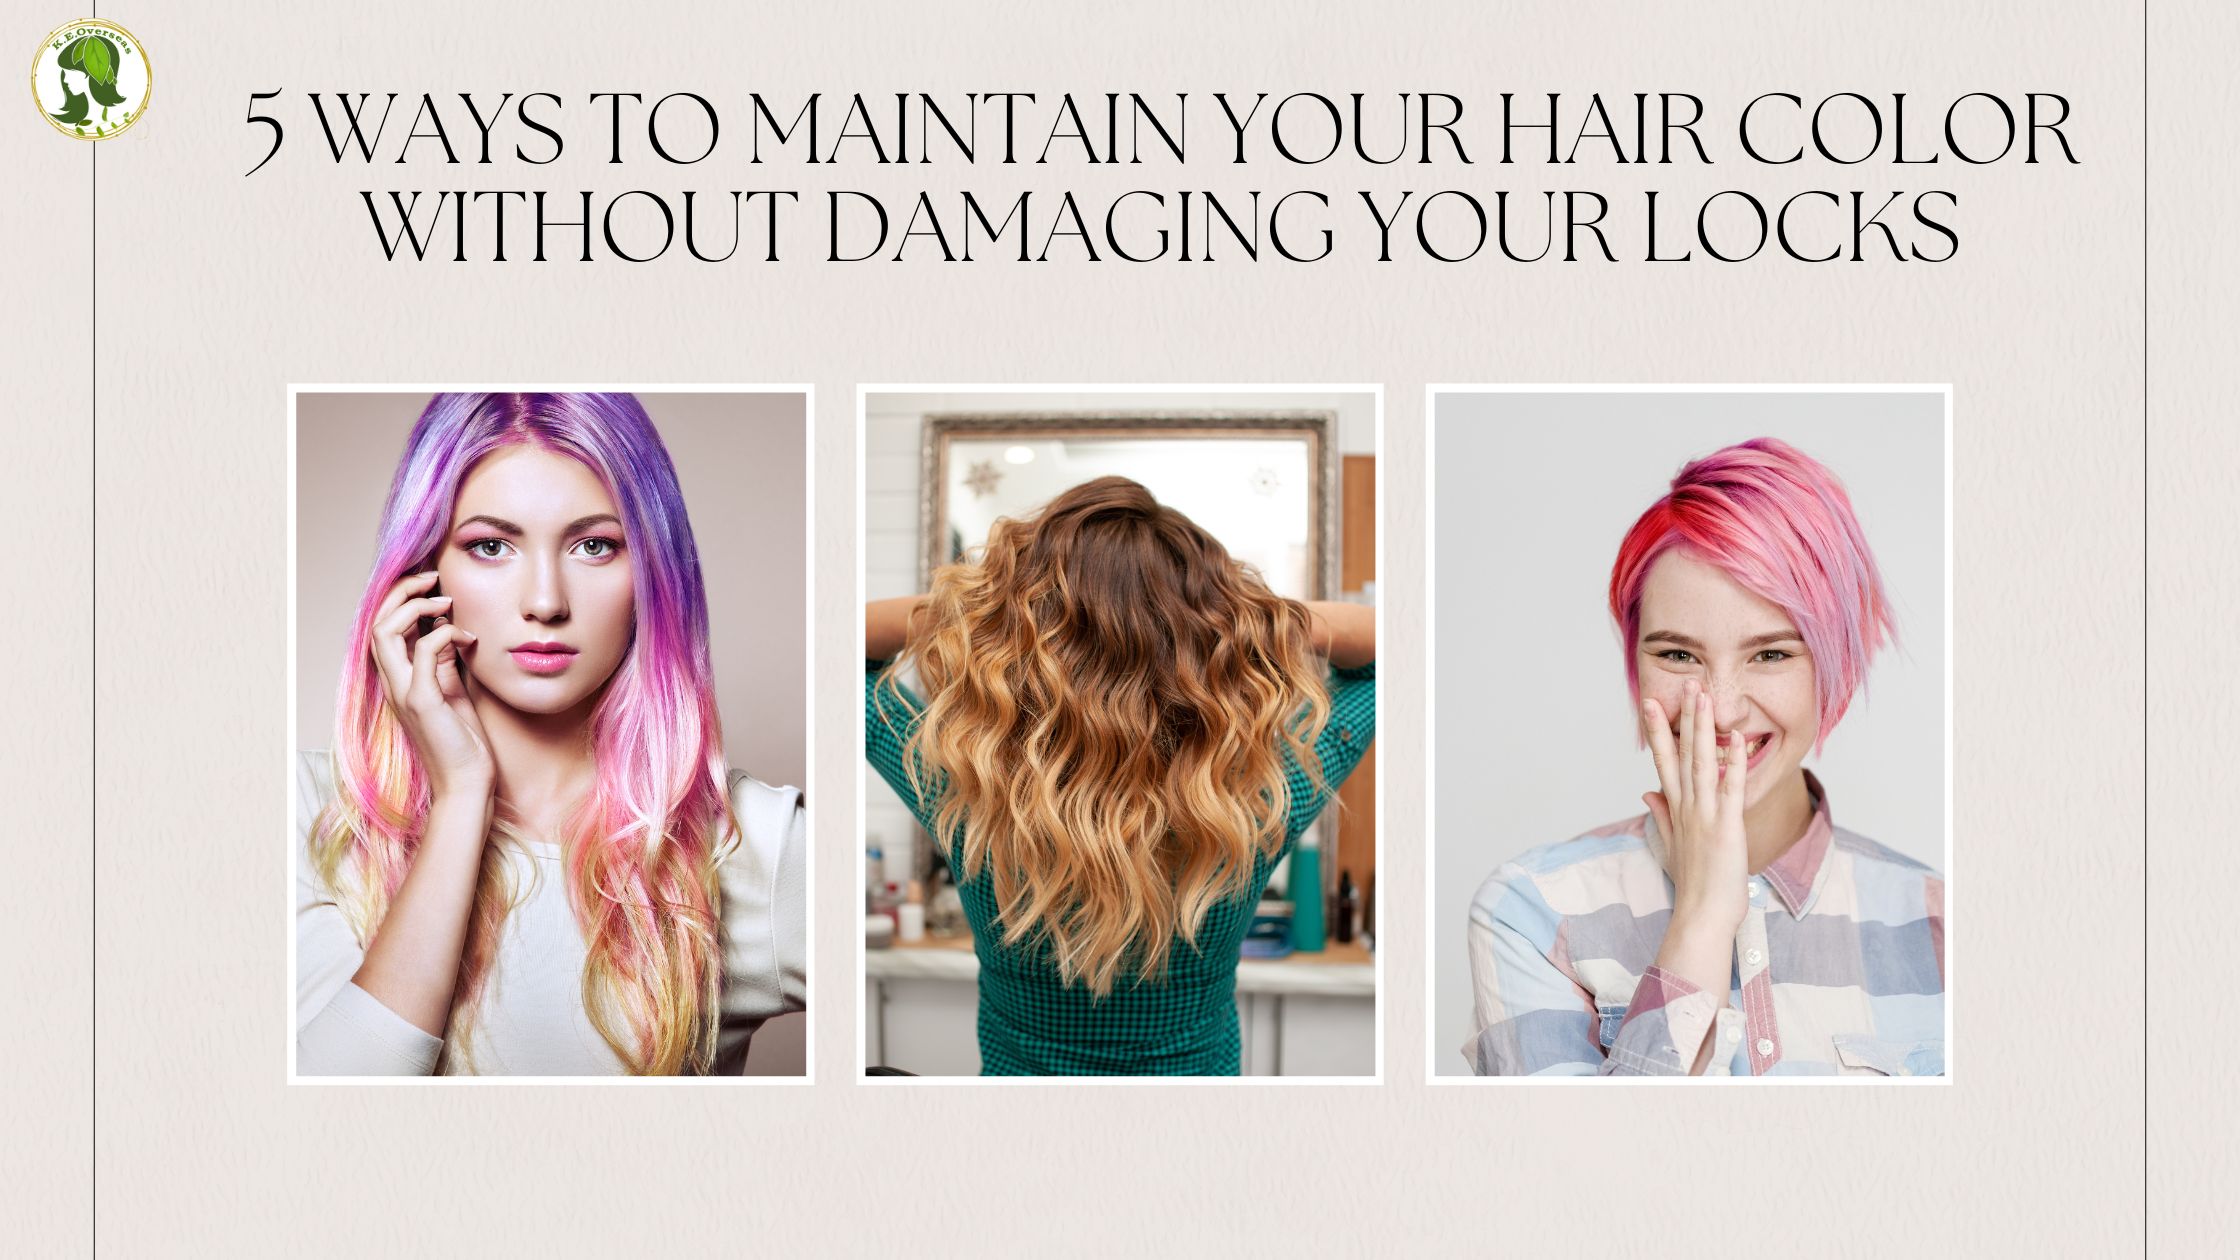 5 Ways to Maintain Your Hair Color Without Damaging Your Locks